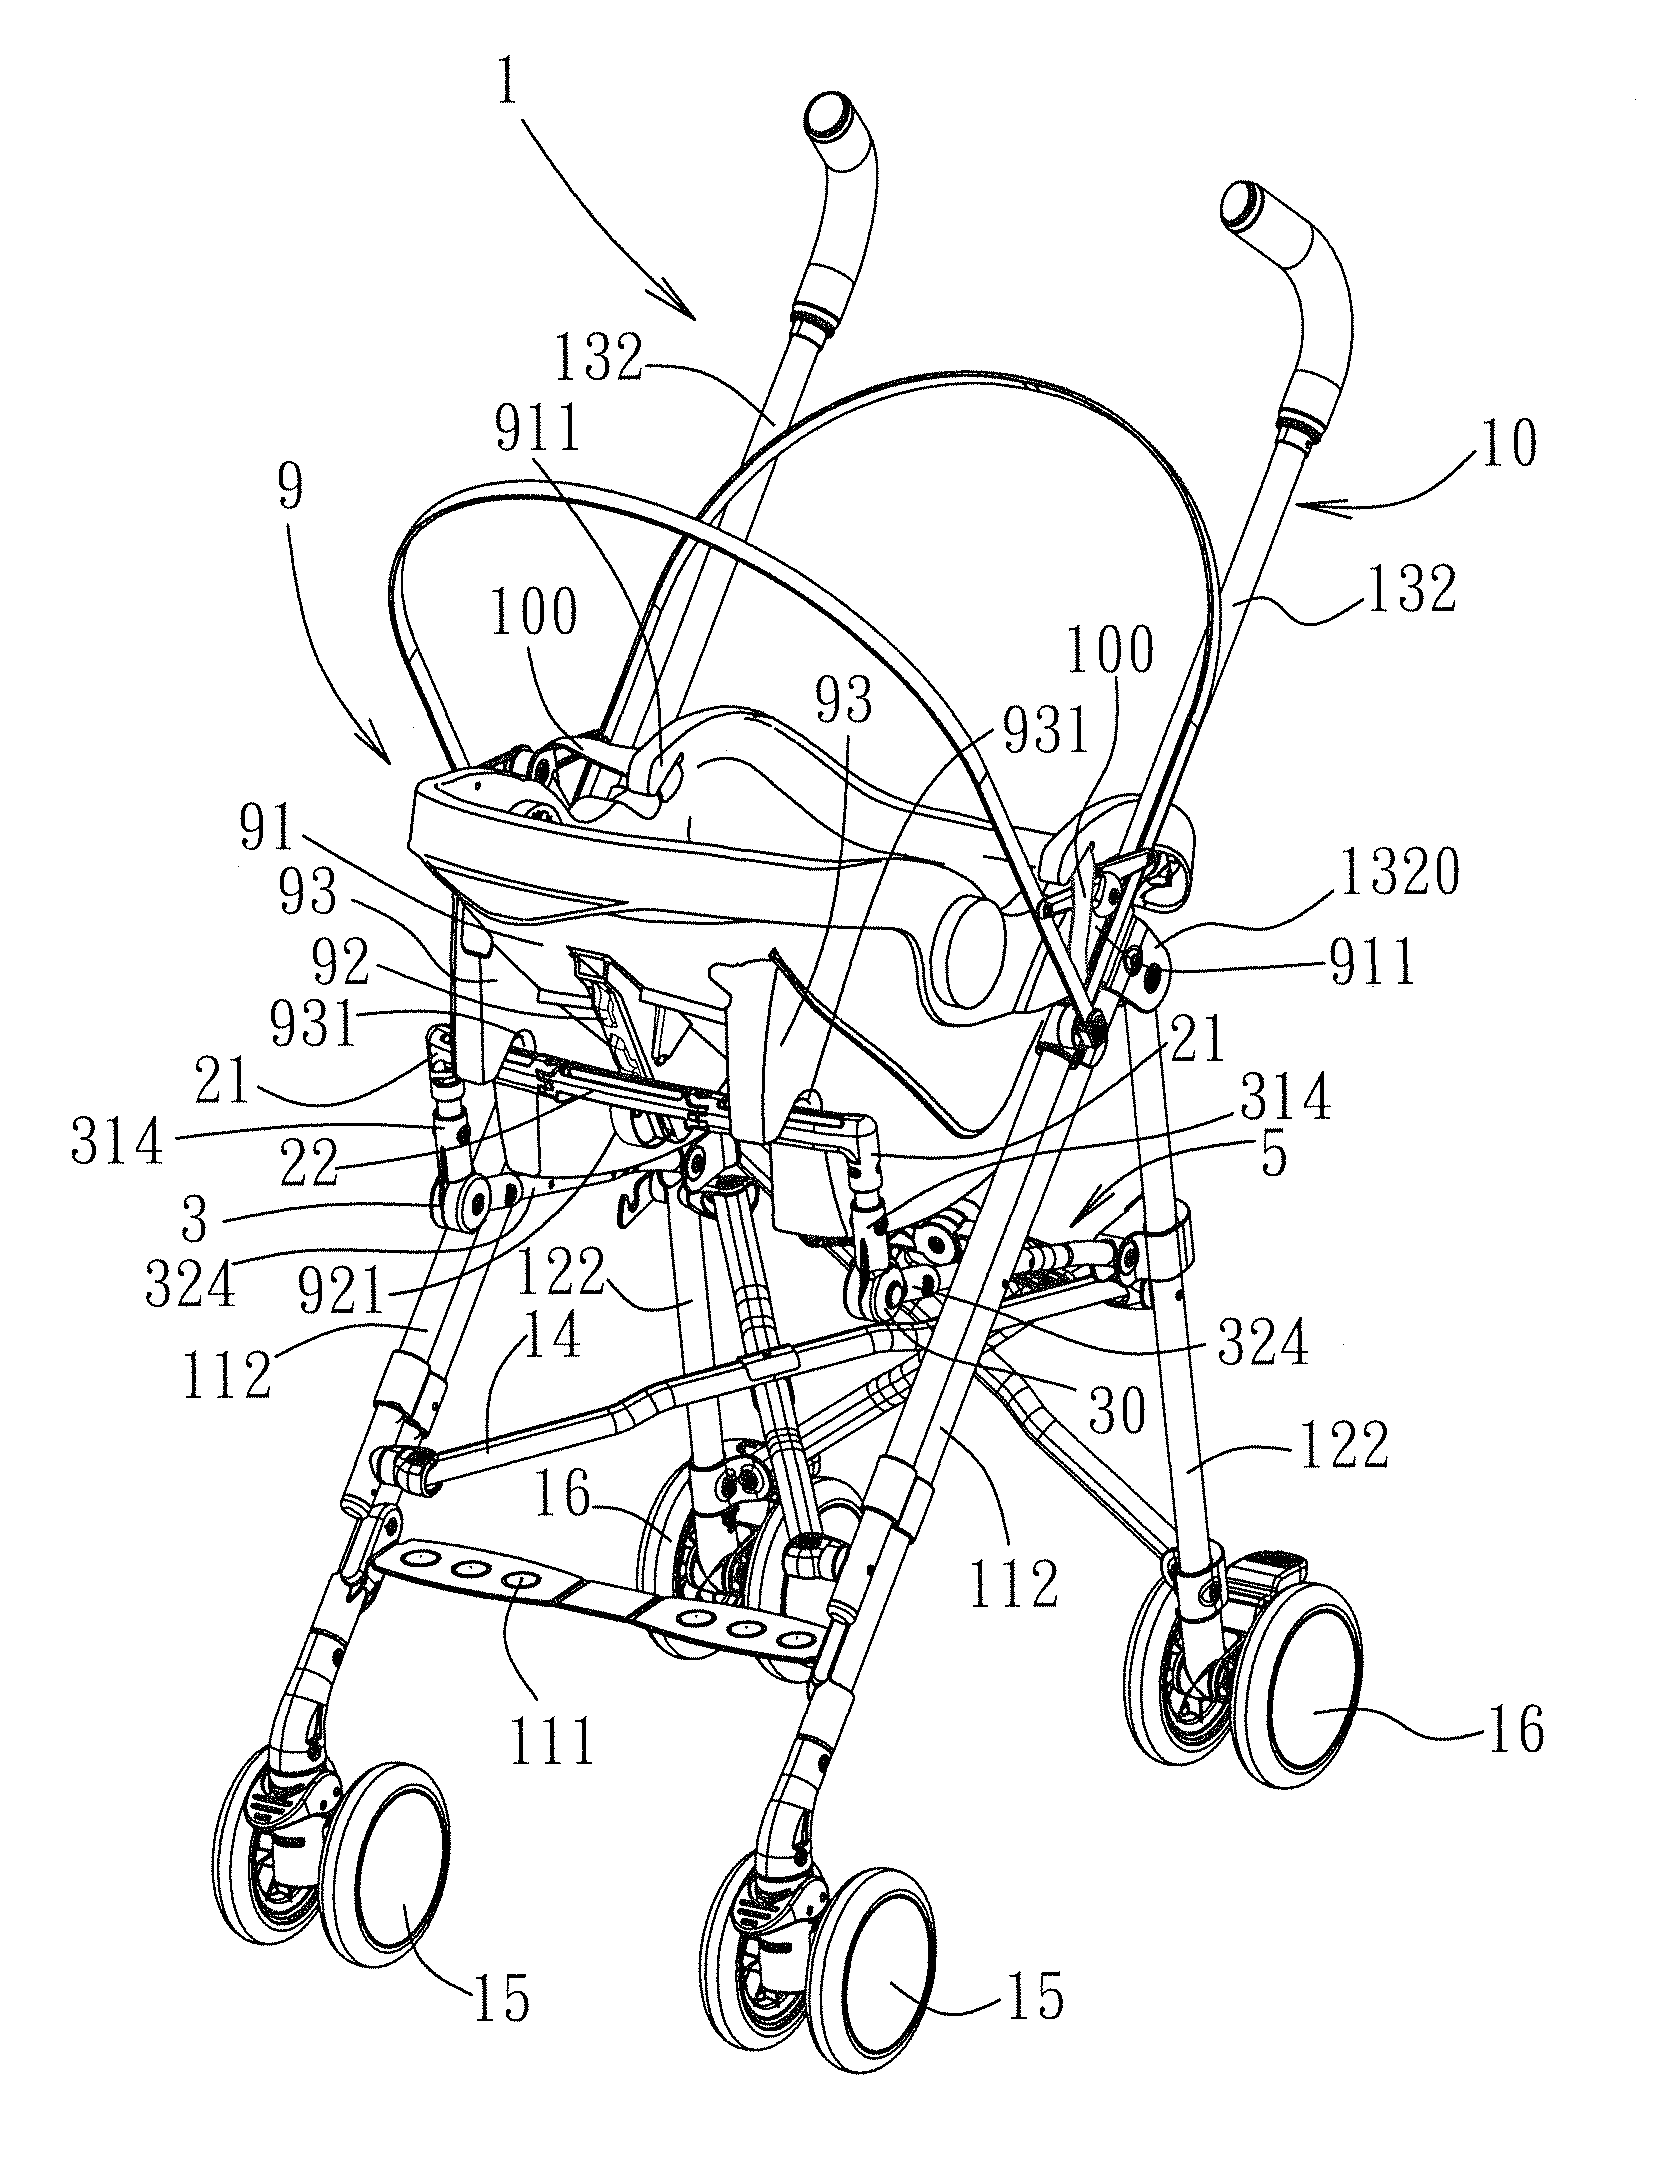 Stroller connectable with a car seat